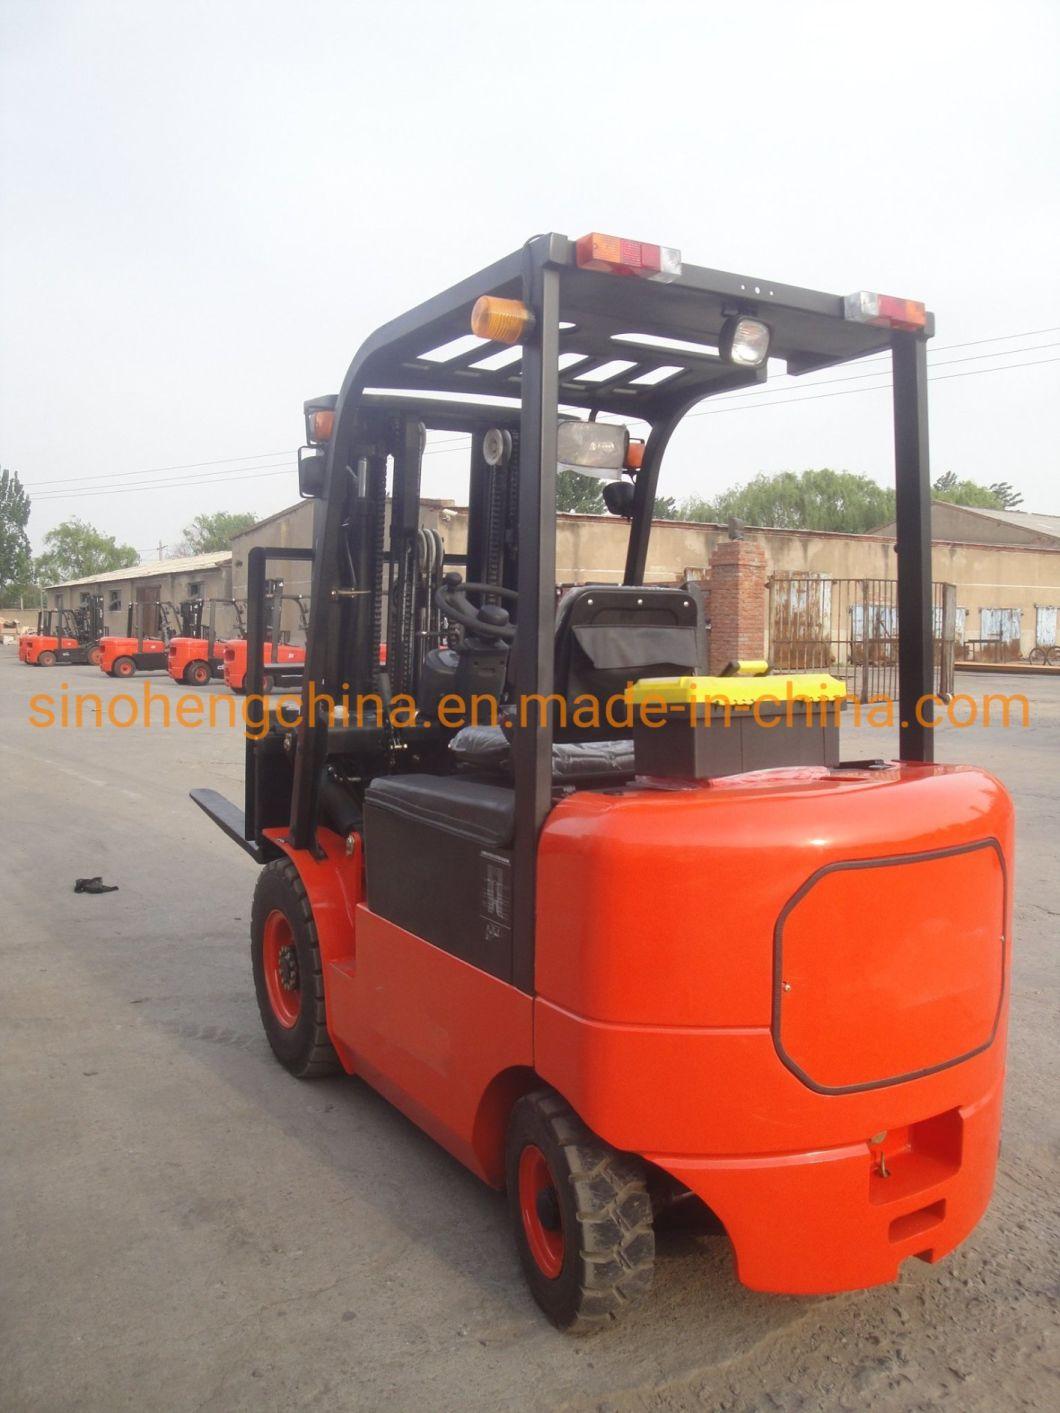 Hot Sale Electric Forklift Truck with Battery (SH35C)